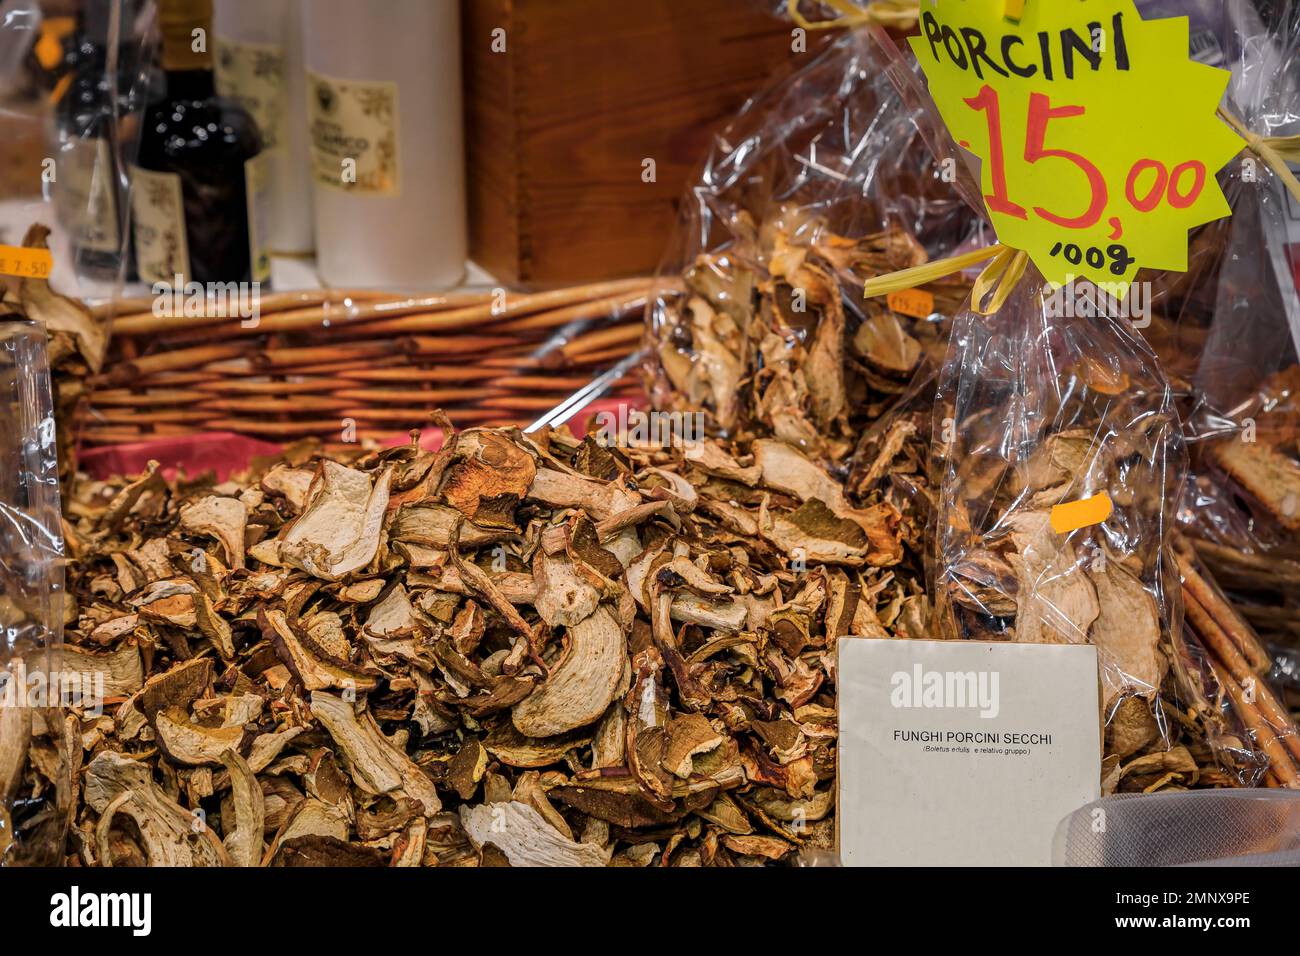 Dried sliced porcini mushrooms for sale in a wicker basket with a description label at a shop in Central Market Mercato Centrale in Florence, Italy Stock Photo